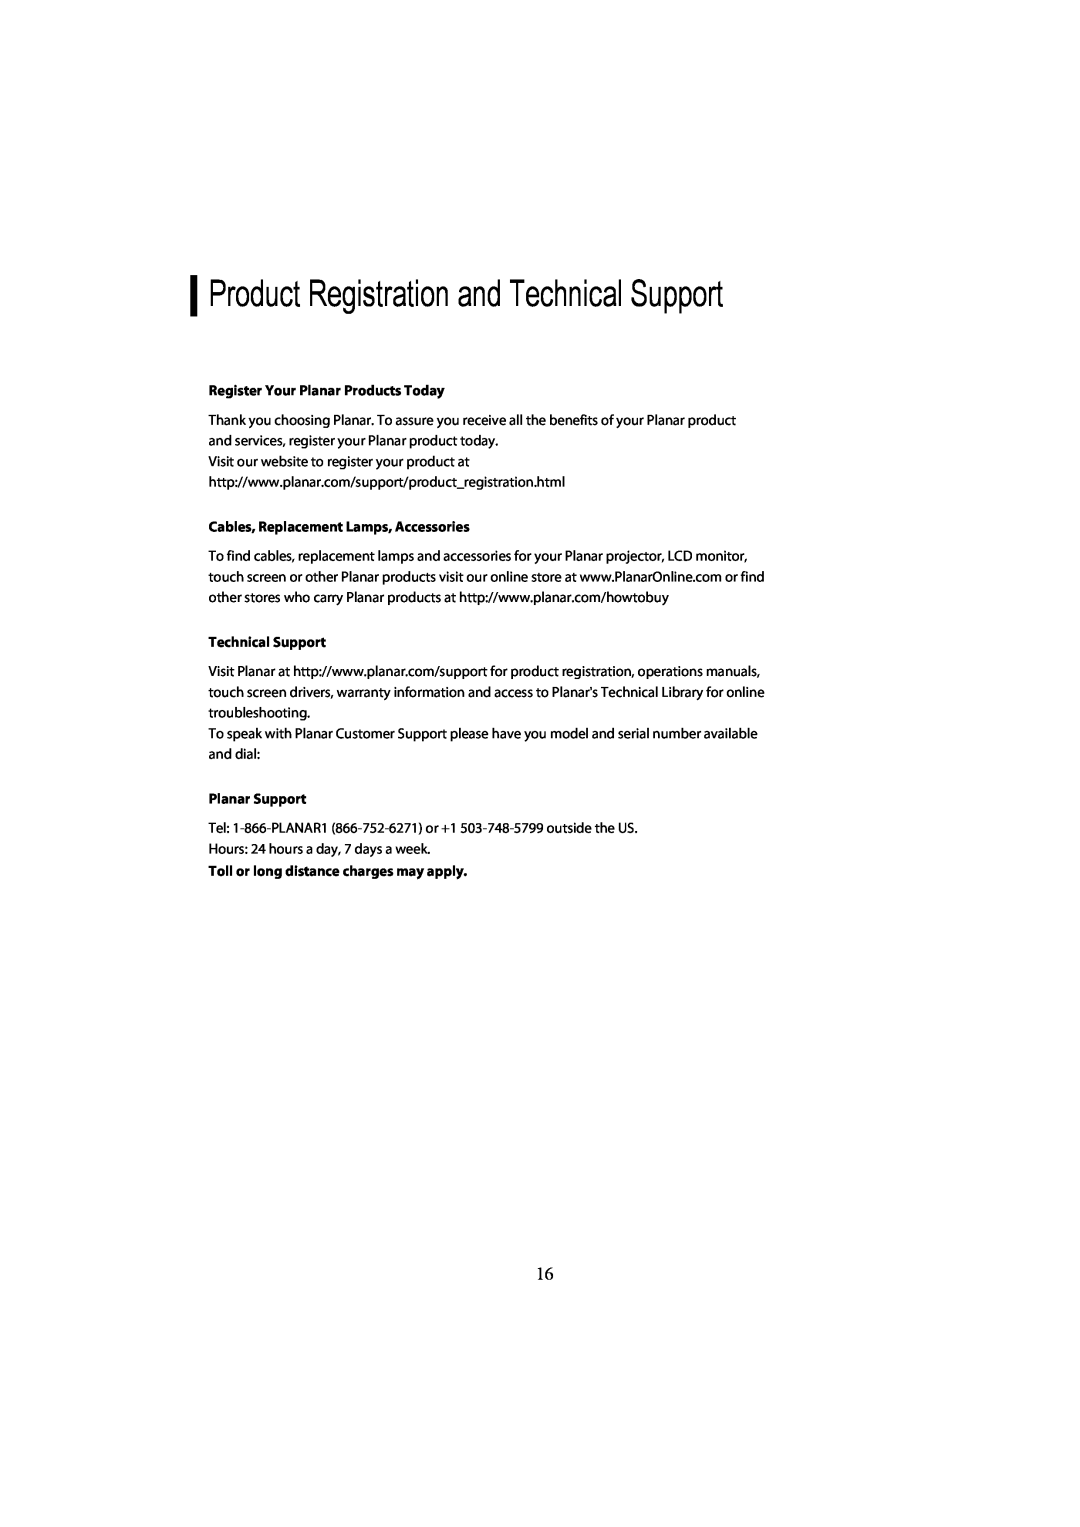 Planar PL2210MW manual Product Registration and Technical Support, Register Your Planar Products Today, Planar Support 